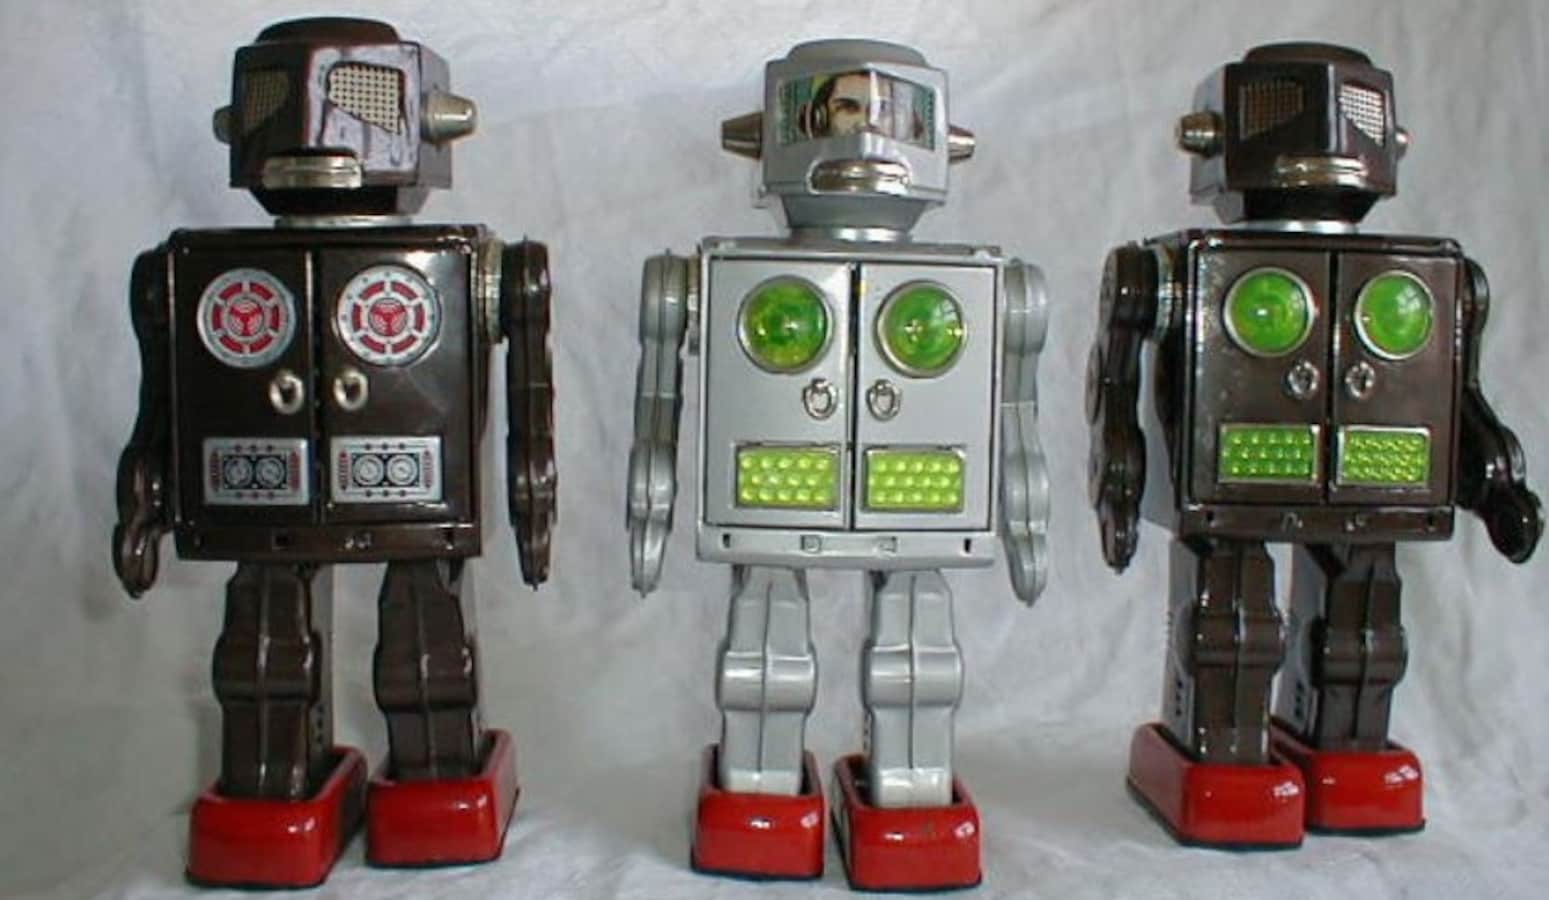 Japanese Tin Toys From 1880's to 2010's | JAPAN Book